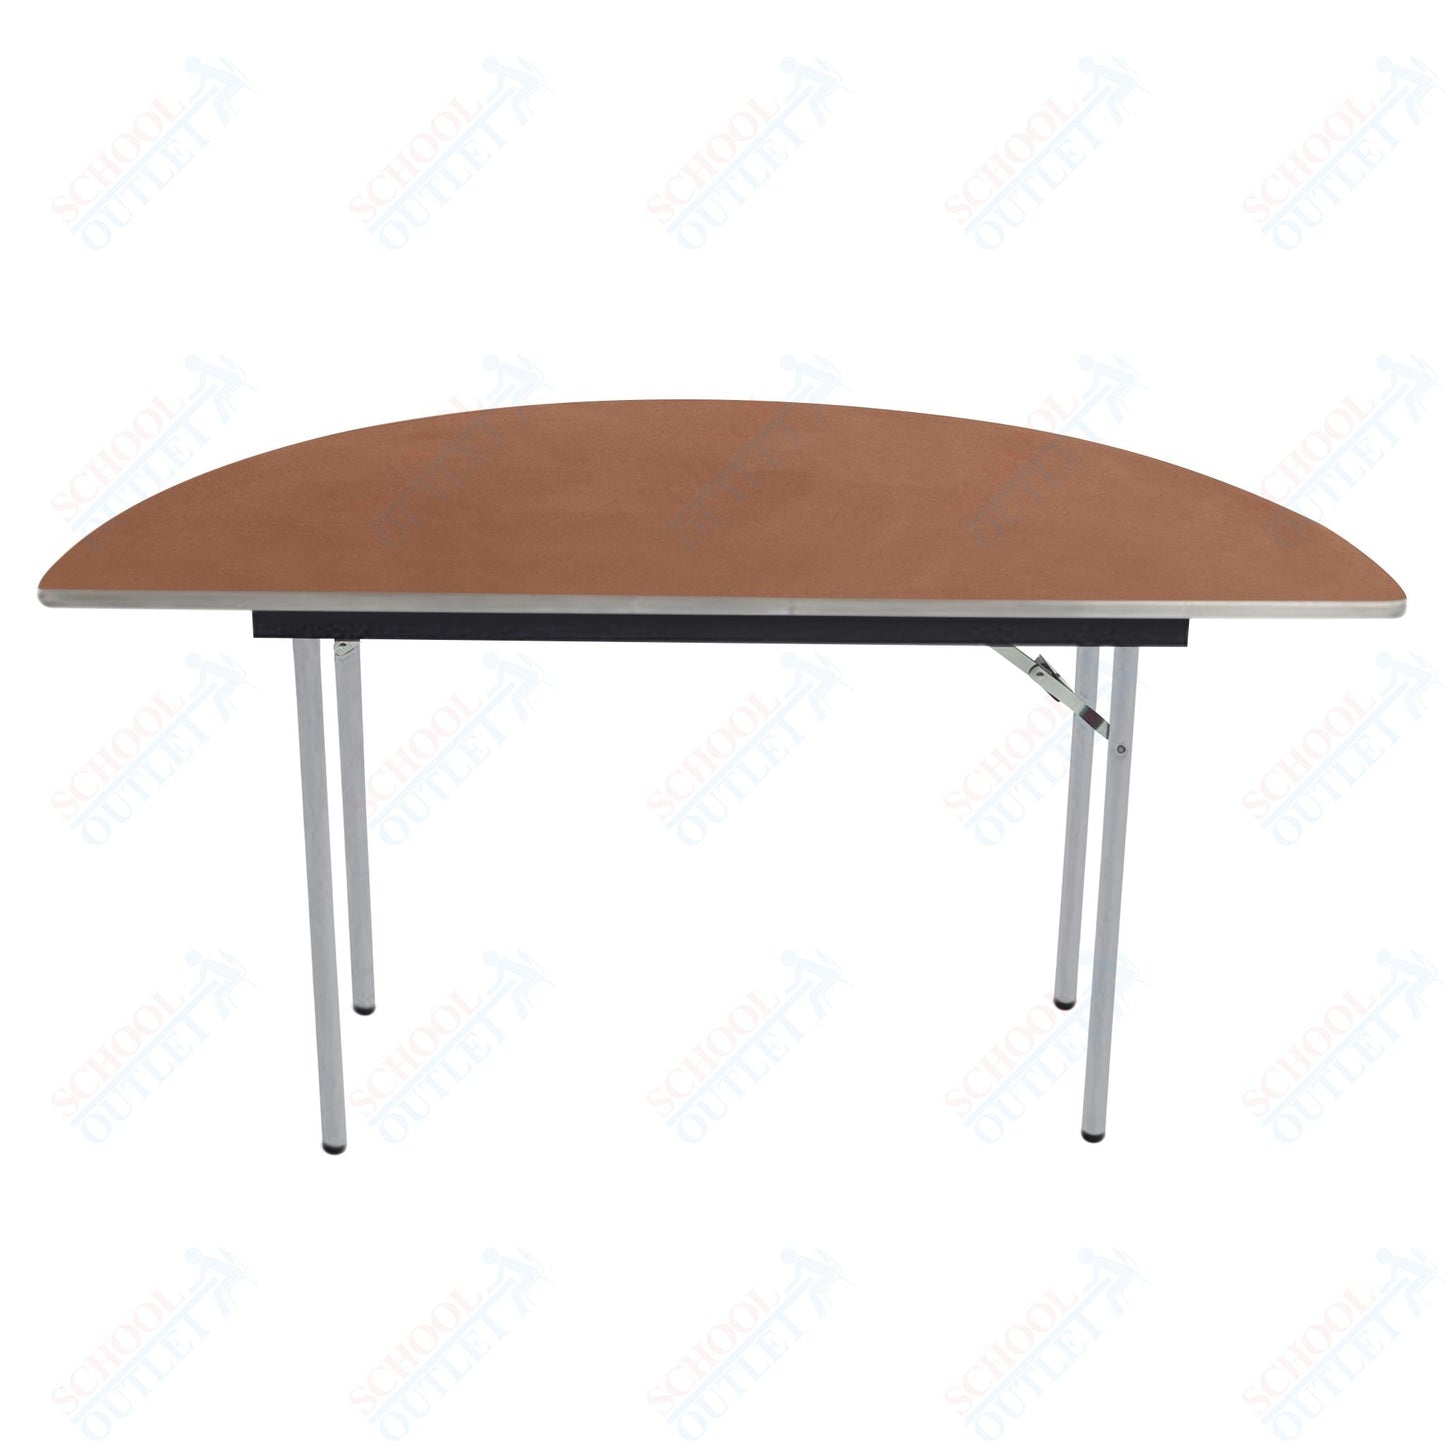 AmTab Folding Table - Plywood Stained and Sealed - Aluminum Edge - Half Round - Half 60" Diameter x 29"H (AmTab AMT - HR60PA) - SchoolOutlet